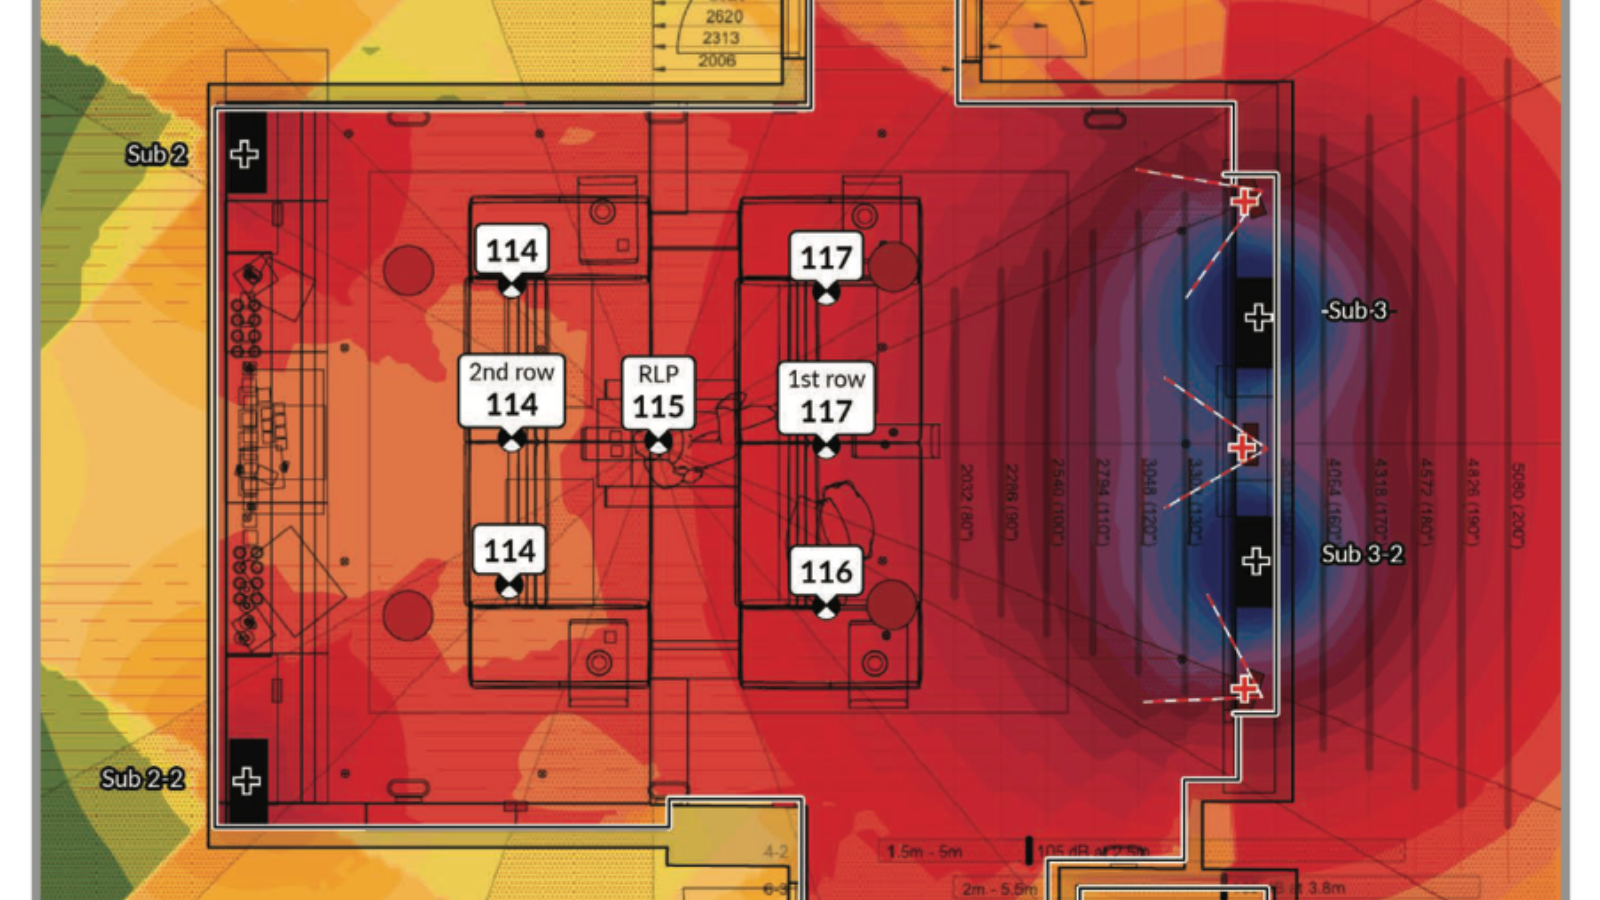 Home cinema render with heat map showing how heat travels